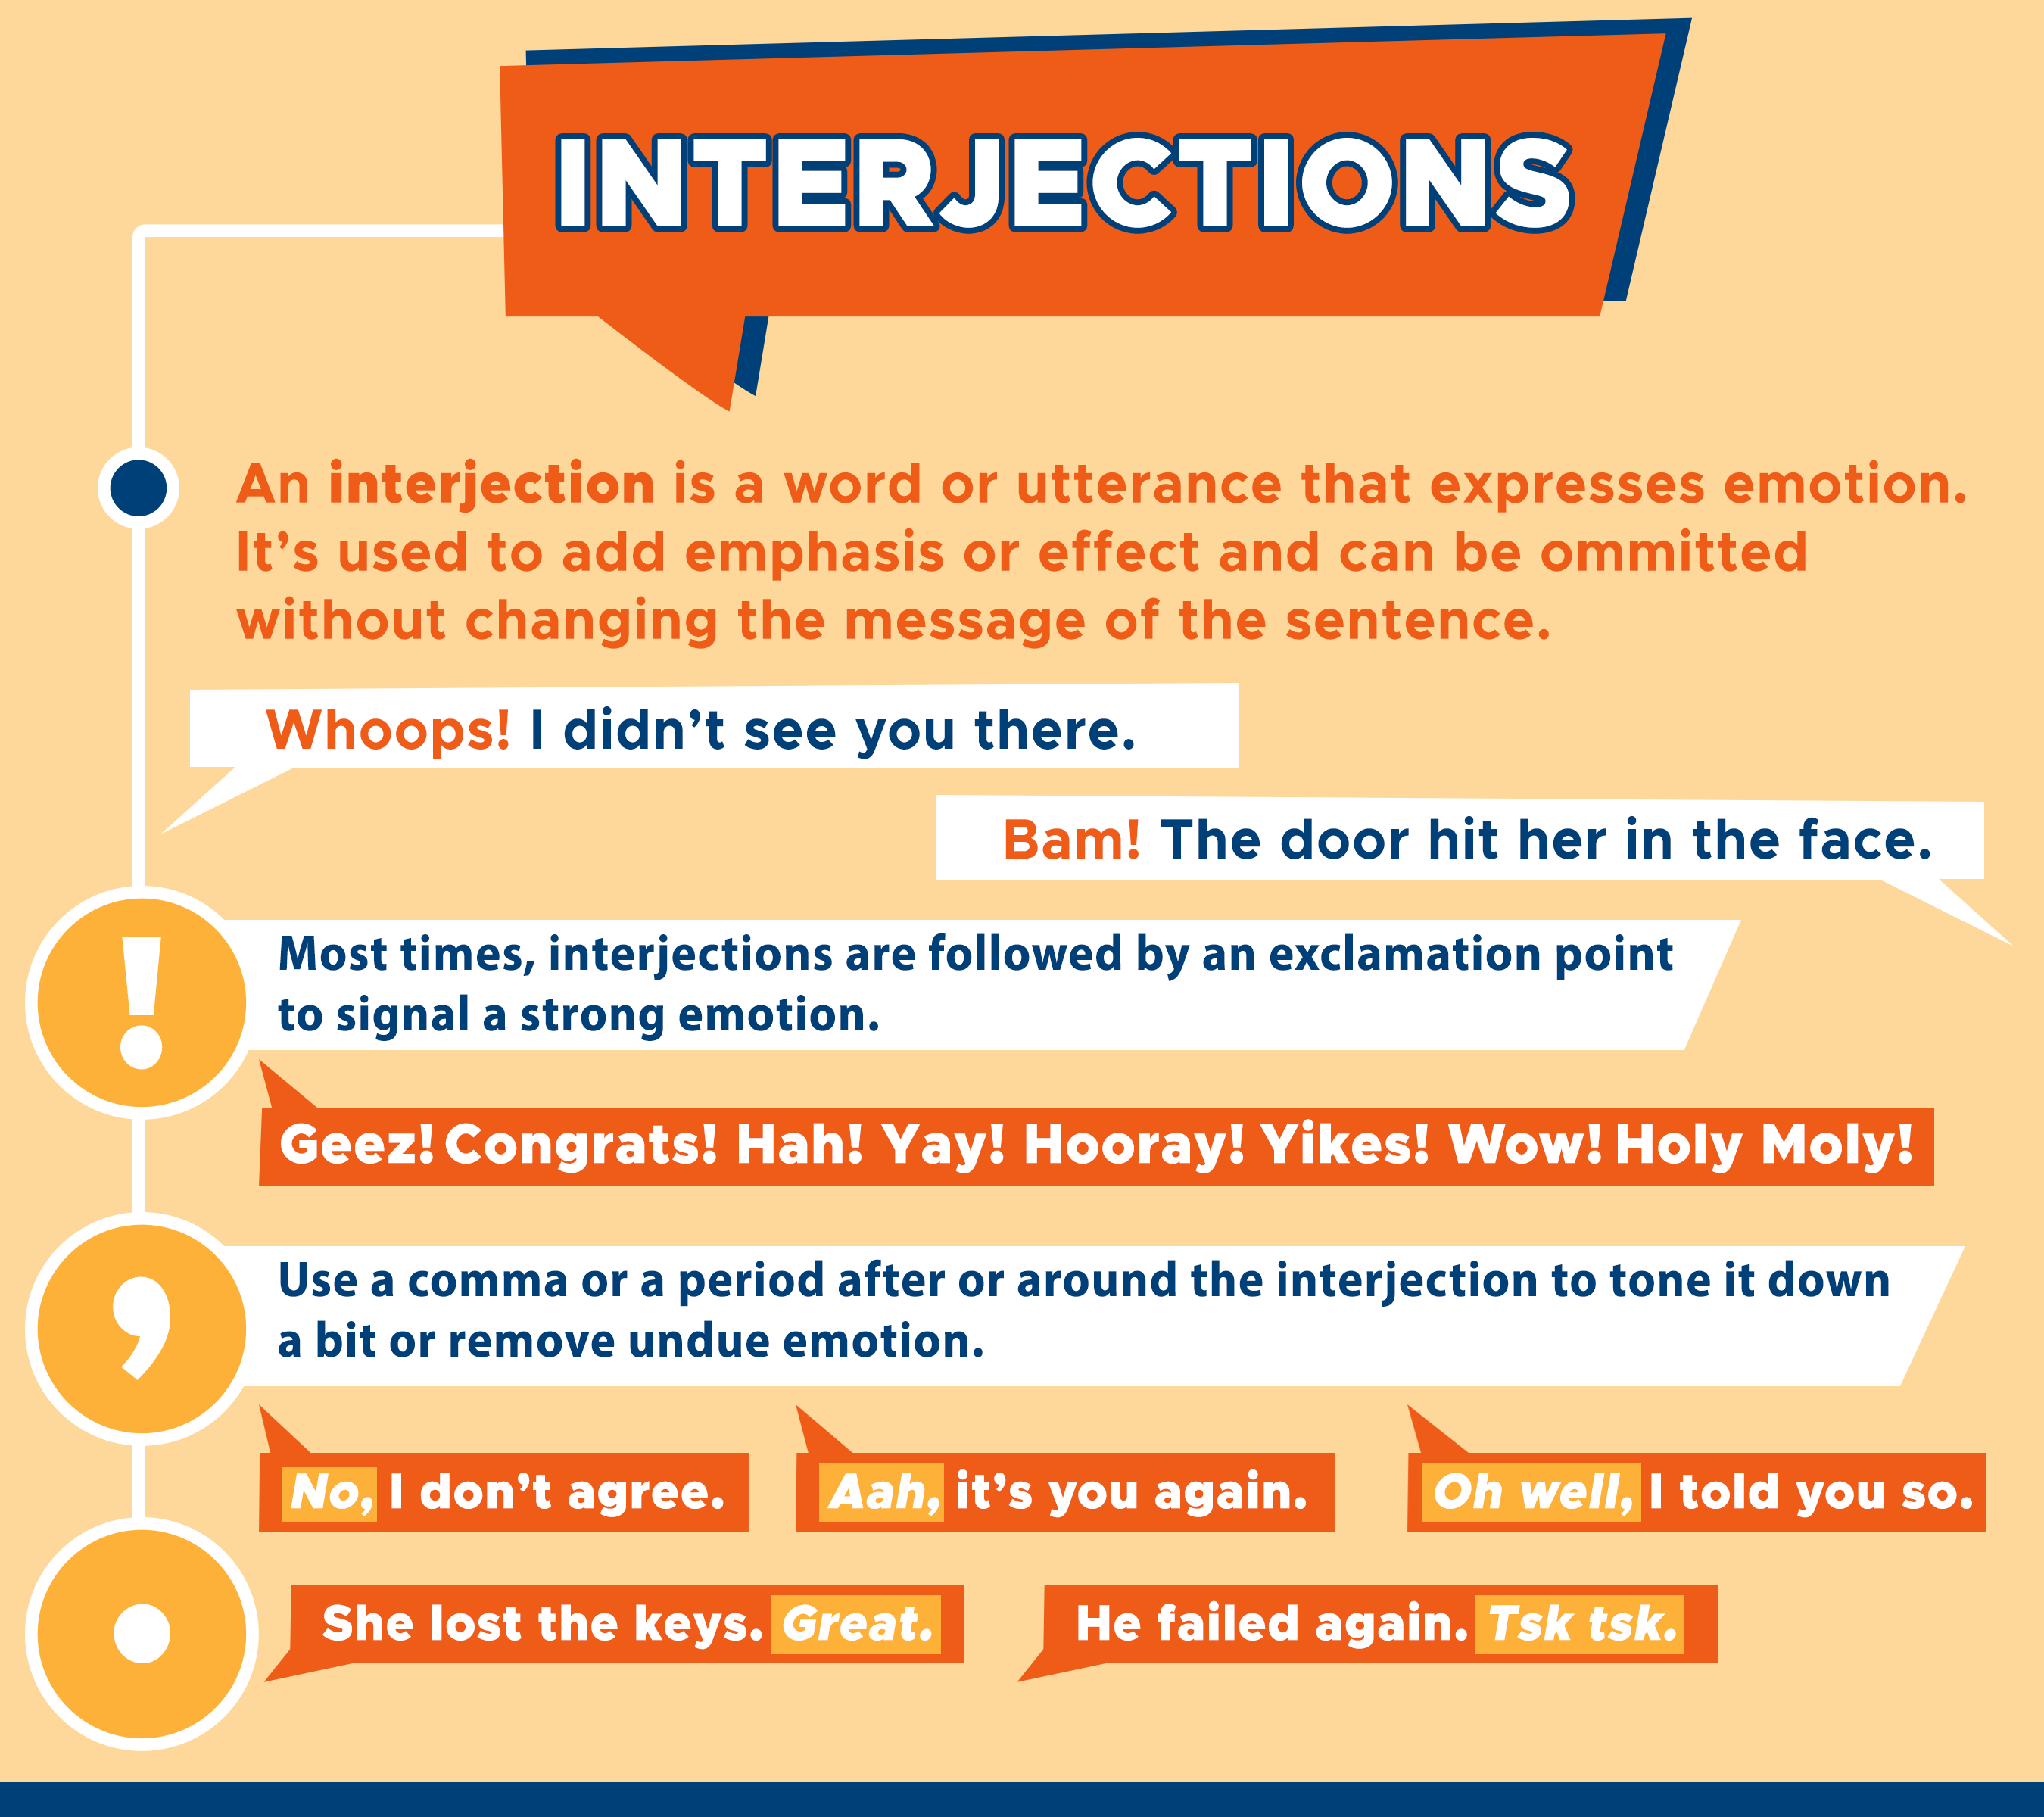 interjection-an-omittable-expressive-word-curvebreakers